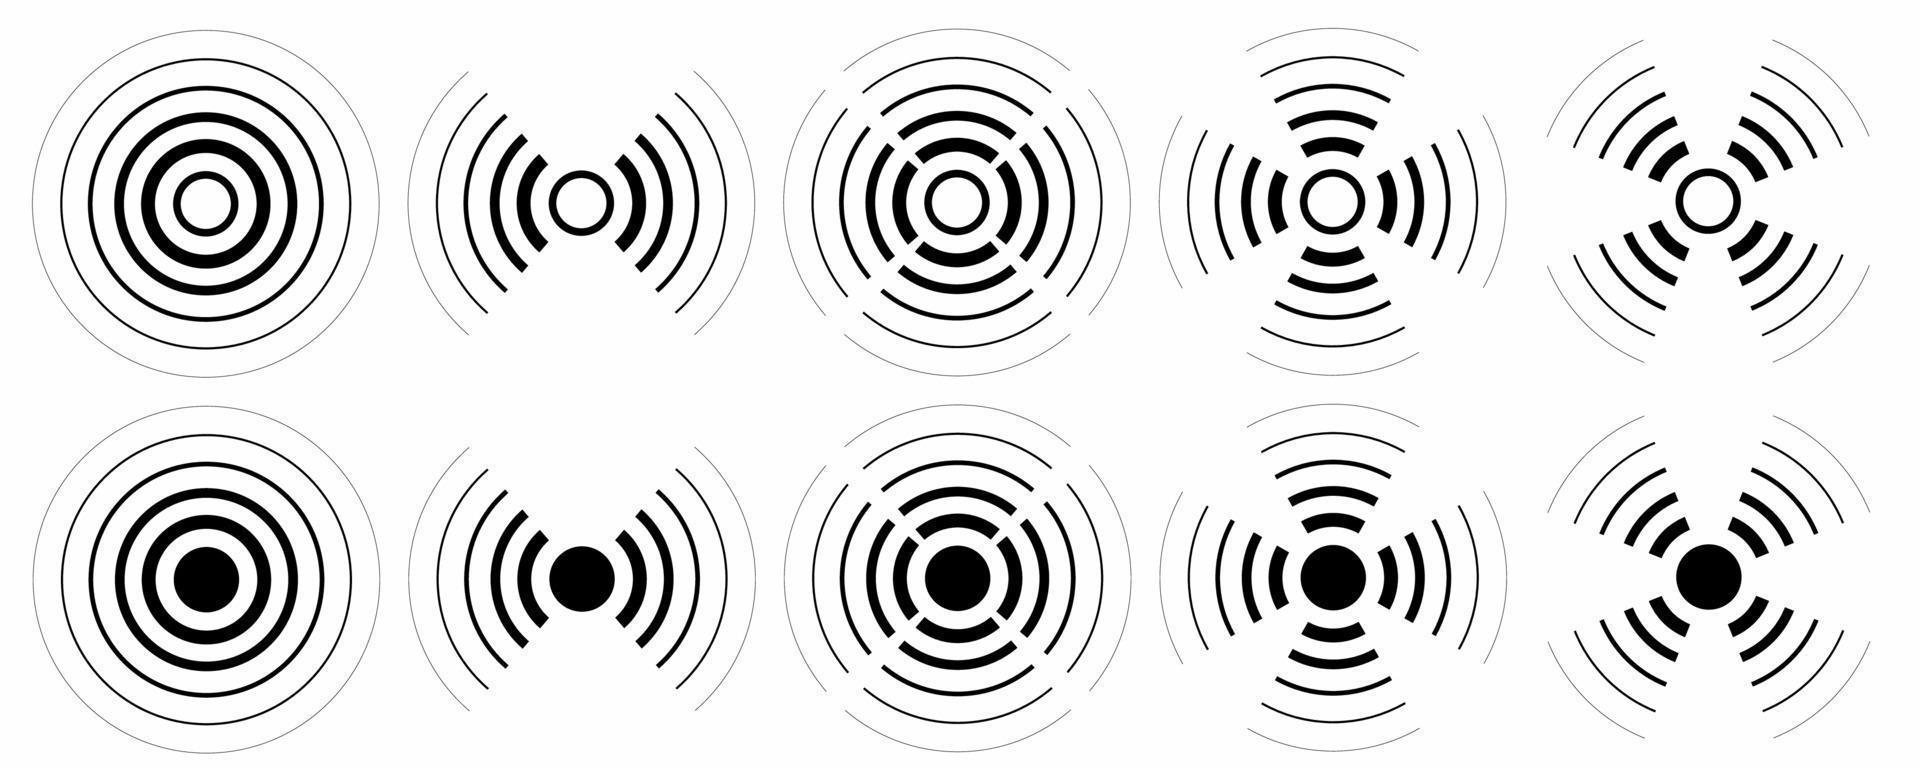 sonar sound icon set isolated on white background vector